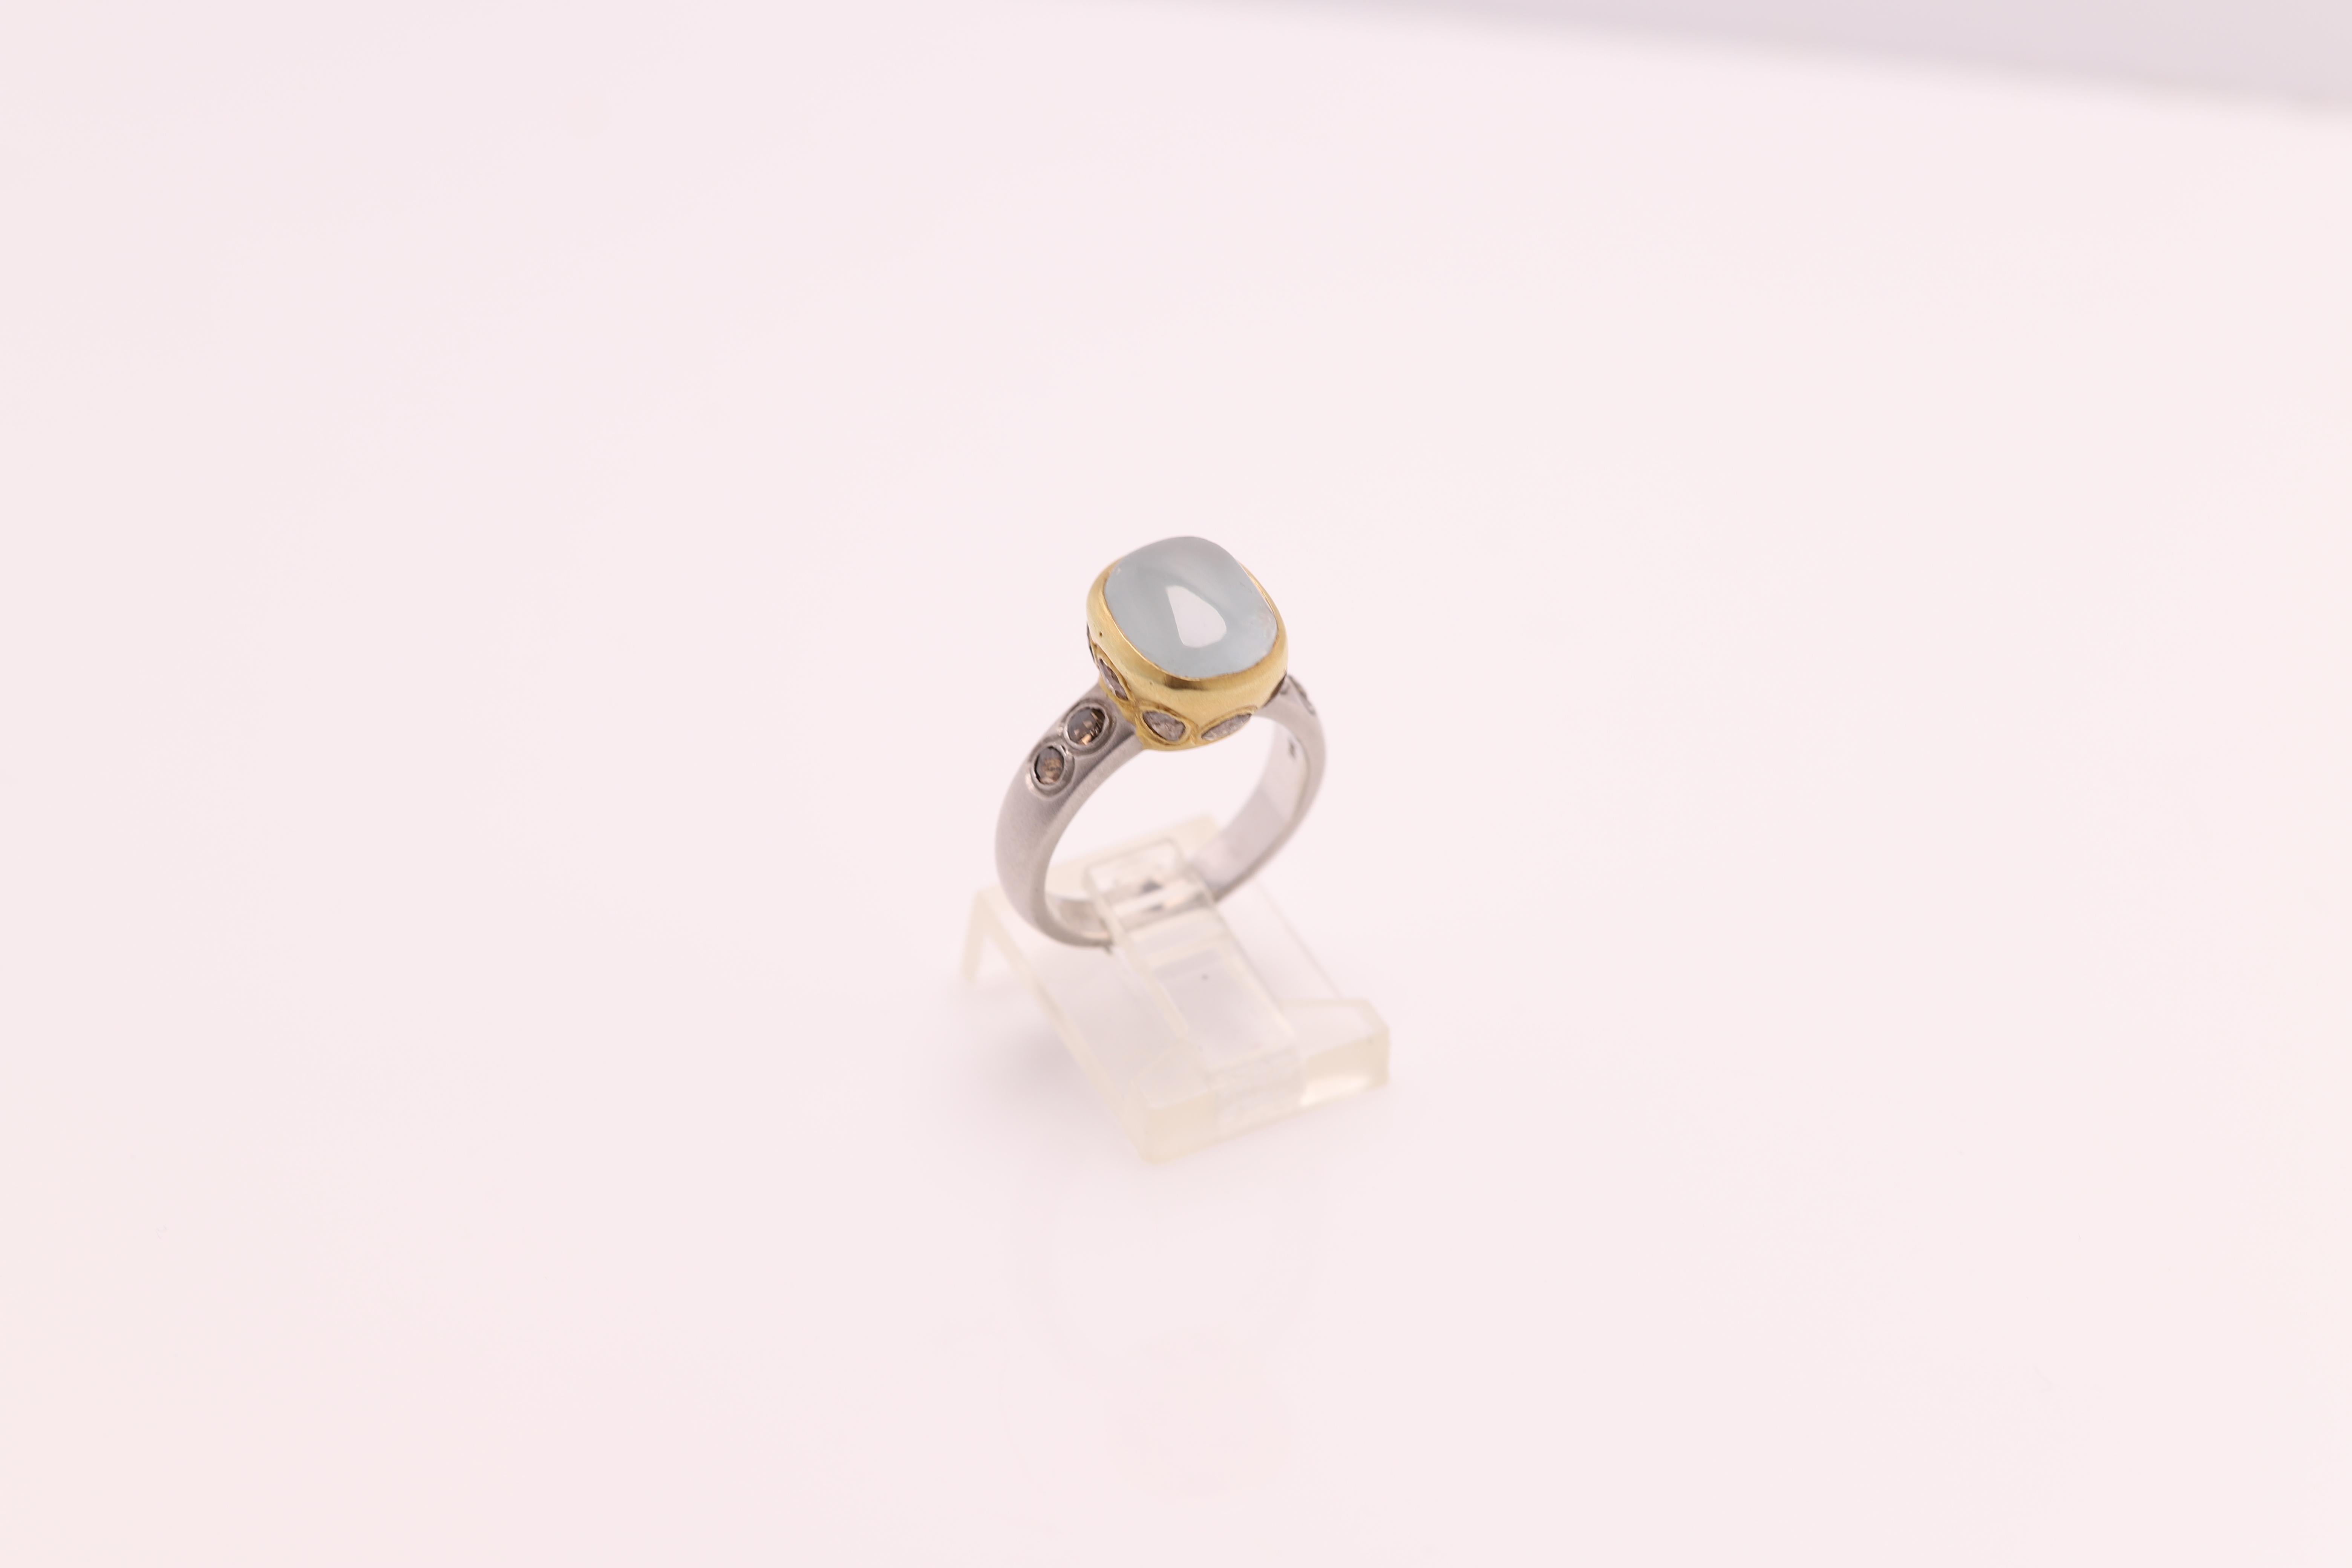 Vintage Aquamarine & Old Cut Diamonds - Hand Made in Italy.
18k Two Tone Yellow & White 7.90 grams - mat finish (not shiny gold)
Aquamarine 3.50 carat approx size 9 x 10 mm
Old cut Light Brown Diamonds 1.00 carat
Finger size 6.75
All Stones are